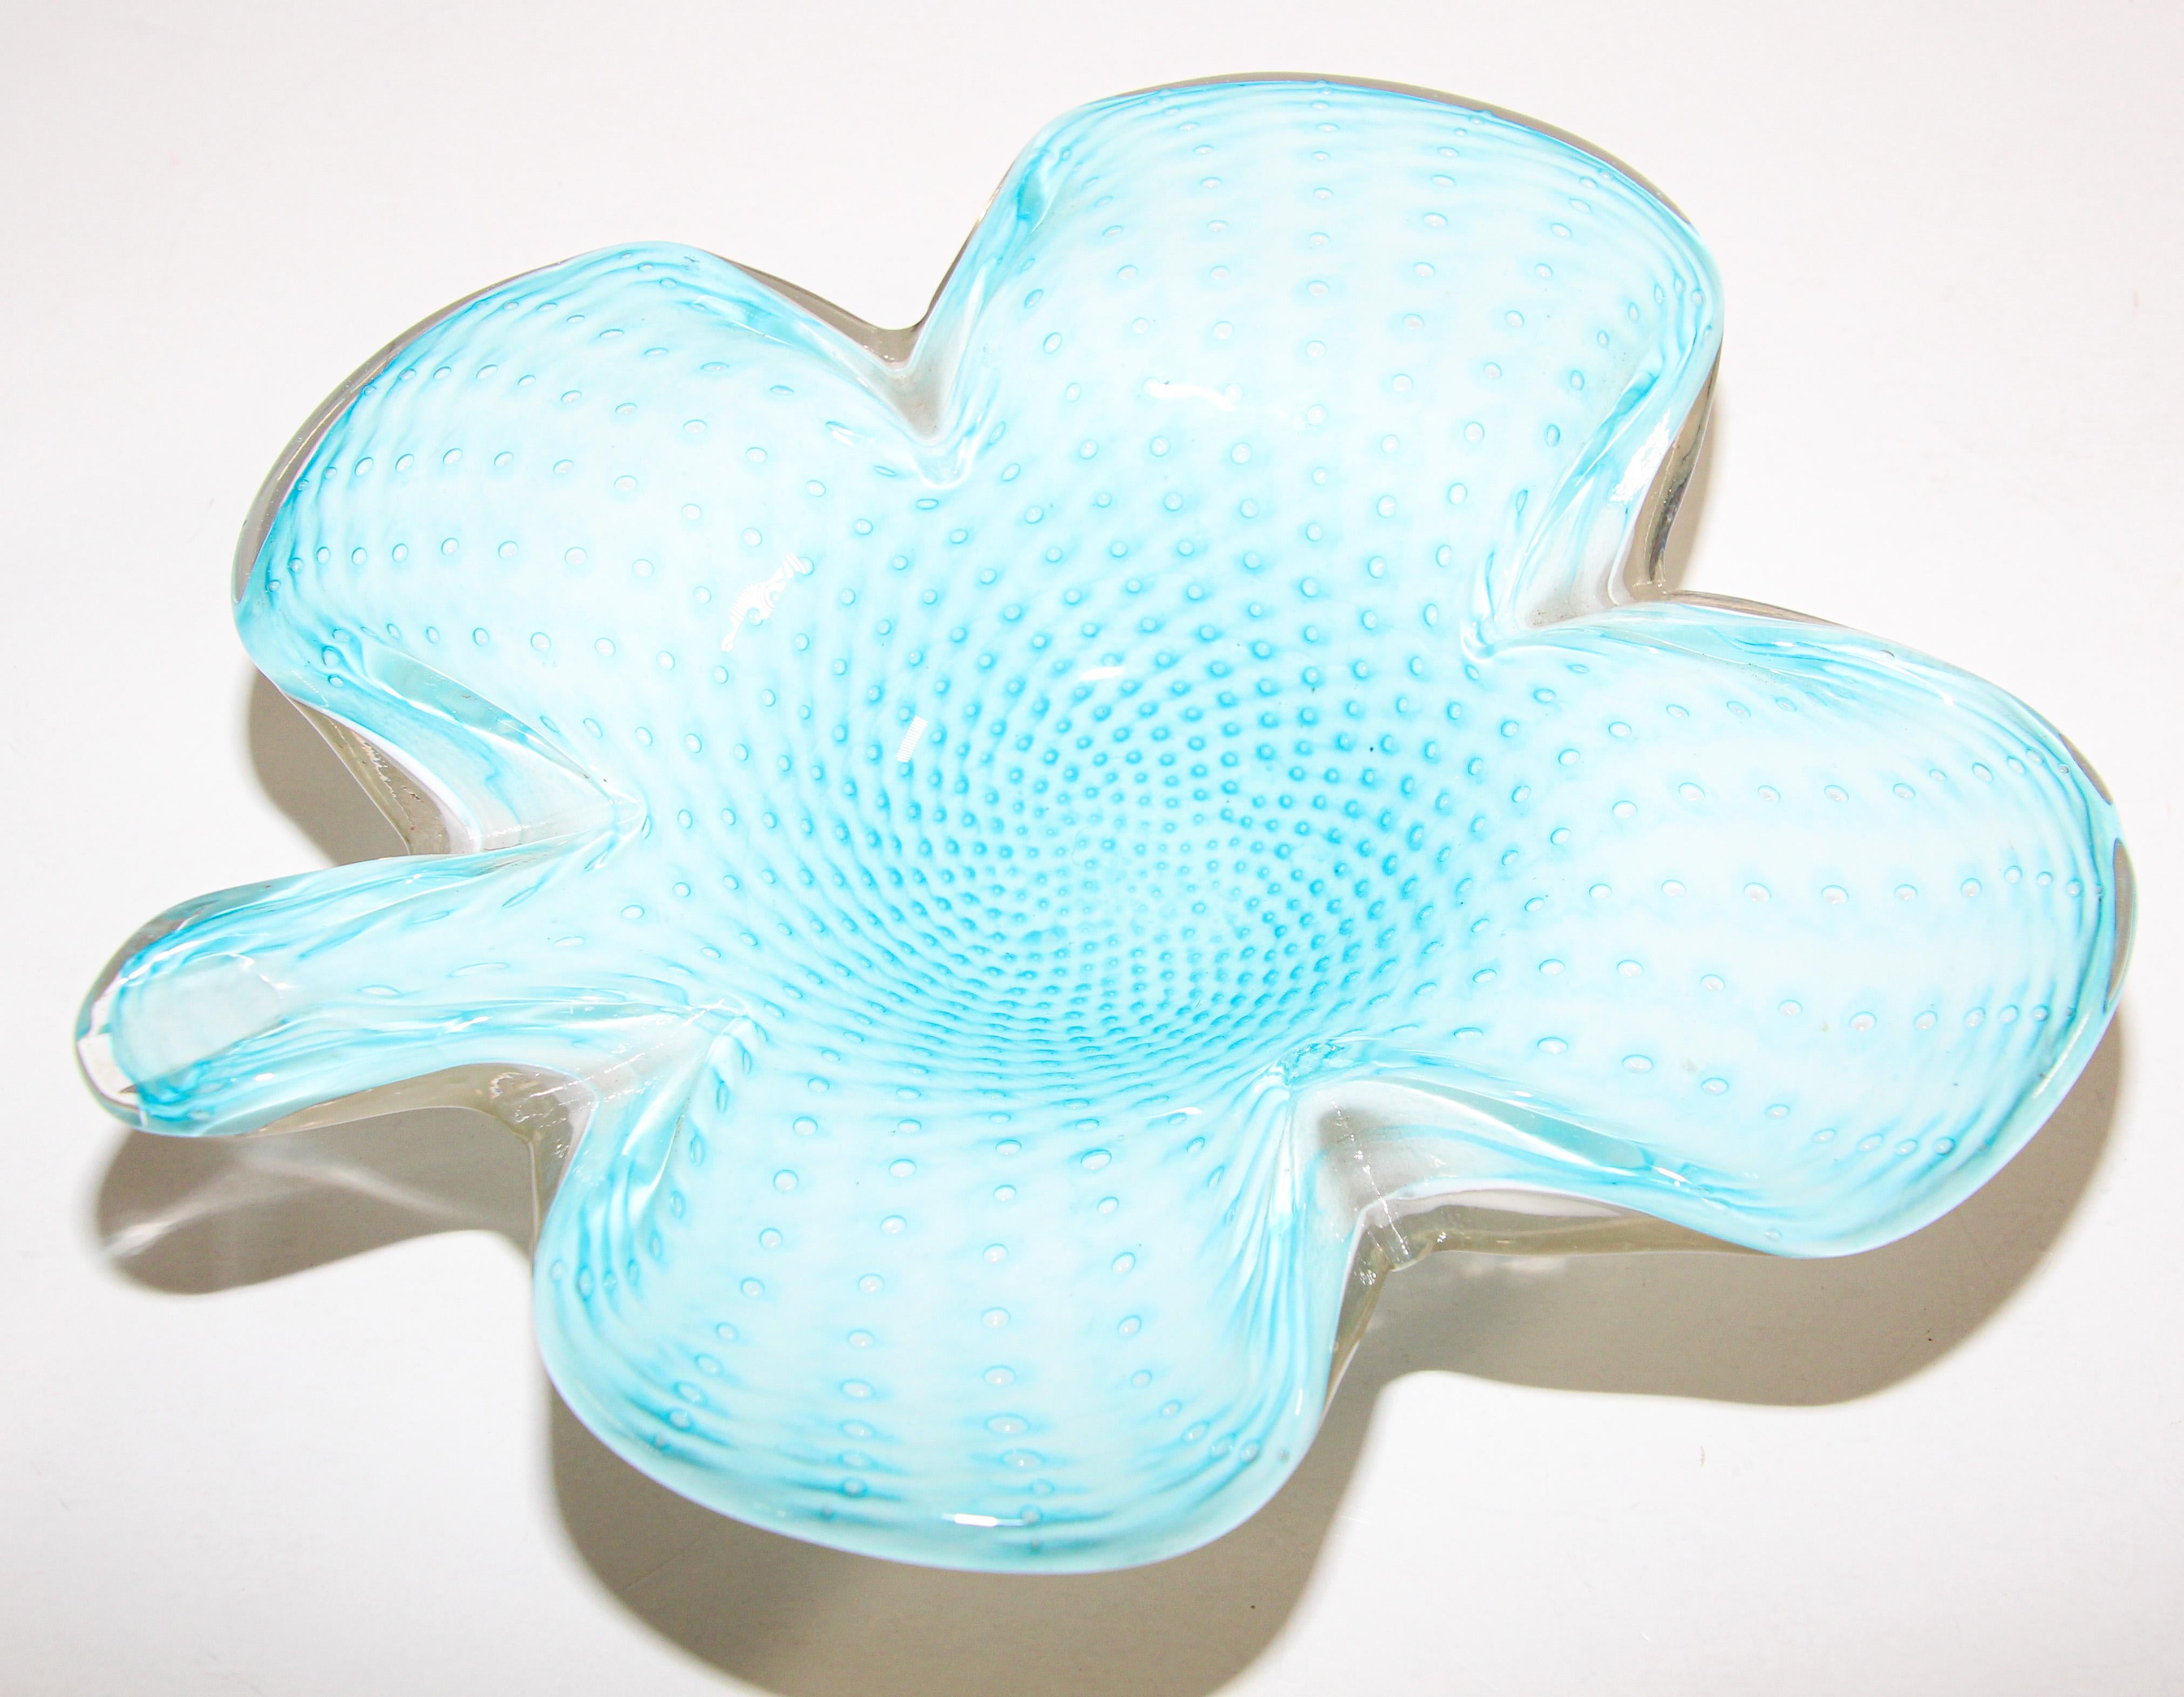 Large gorgeous mid-20th century Italian Murano Venetian hand blown turquoise art glass In the form of a four leaf clover,.
Beautiful Murano glass dish, it is clear with gold flecks and controlled bubbles.
The catchall bowl is filled with bubbles